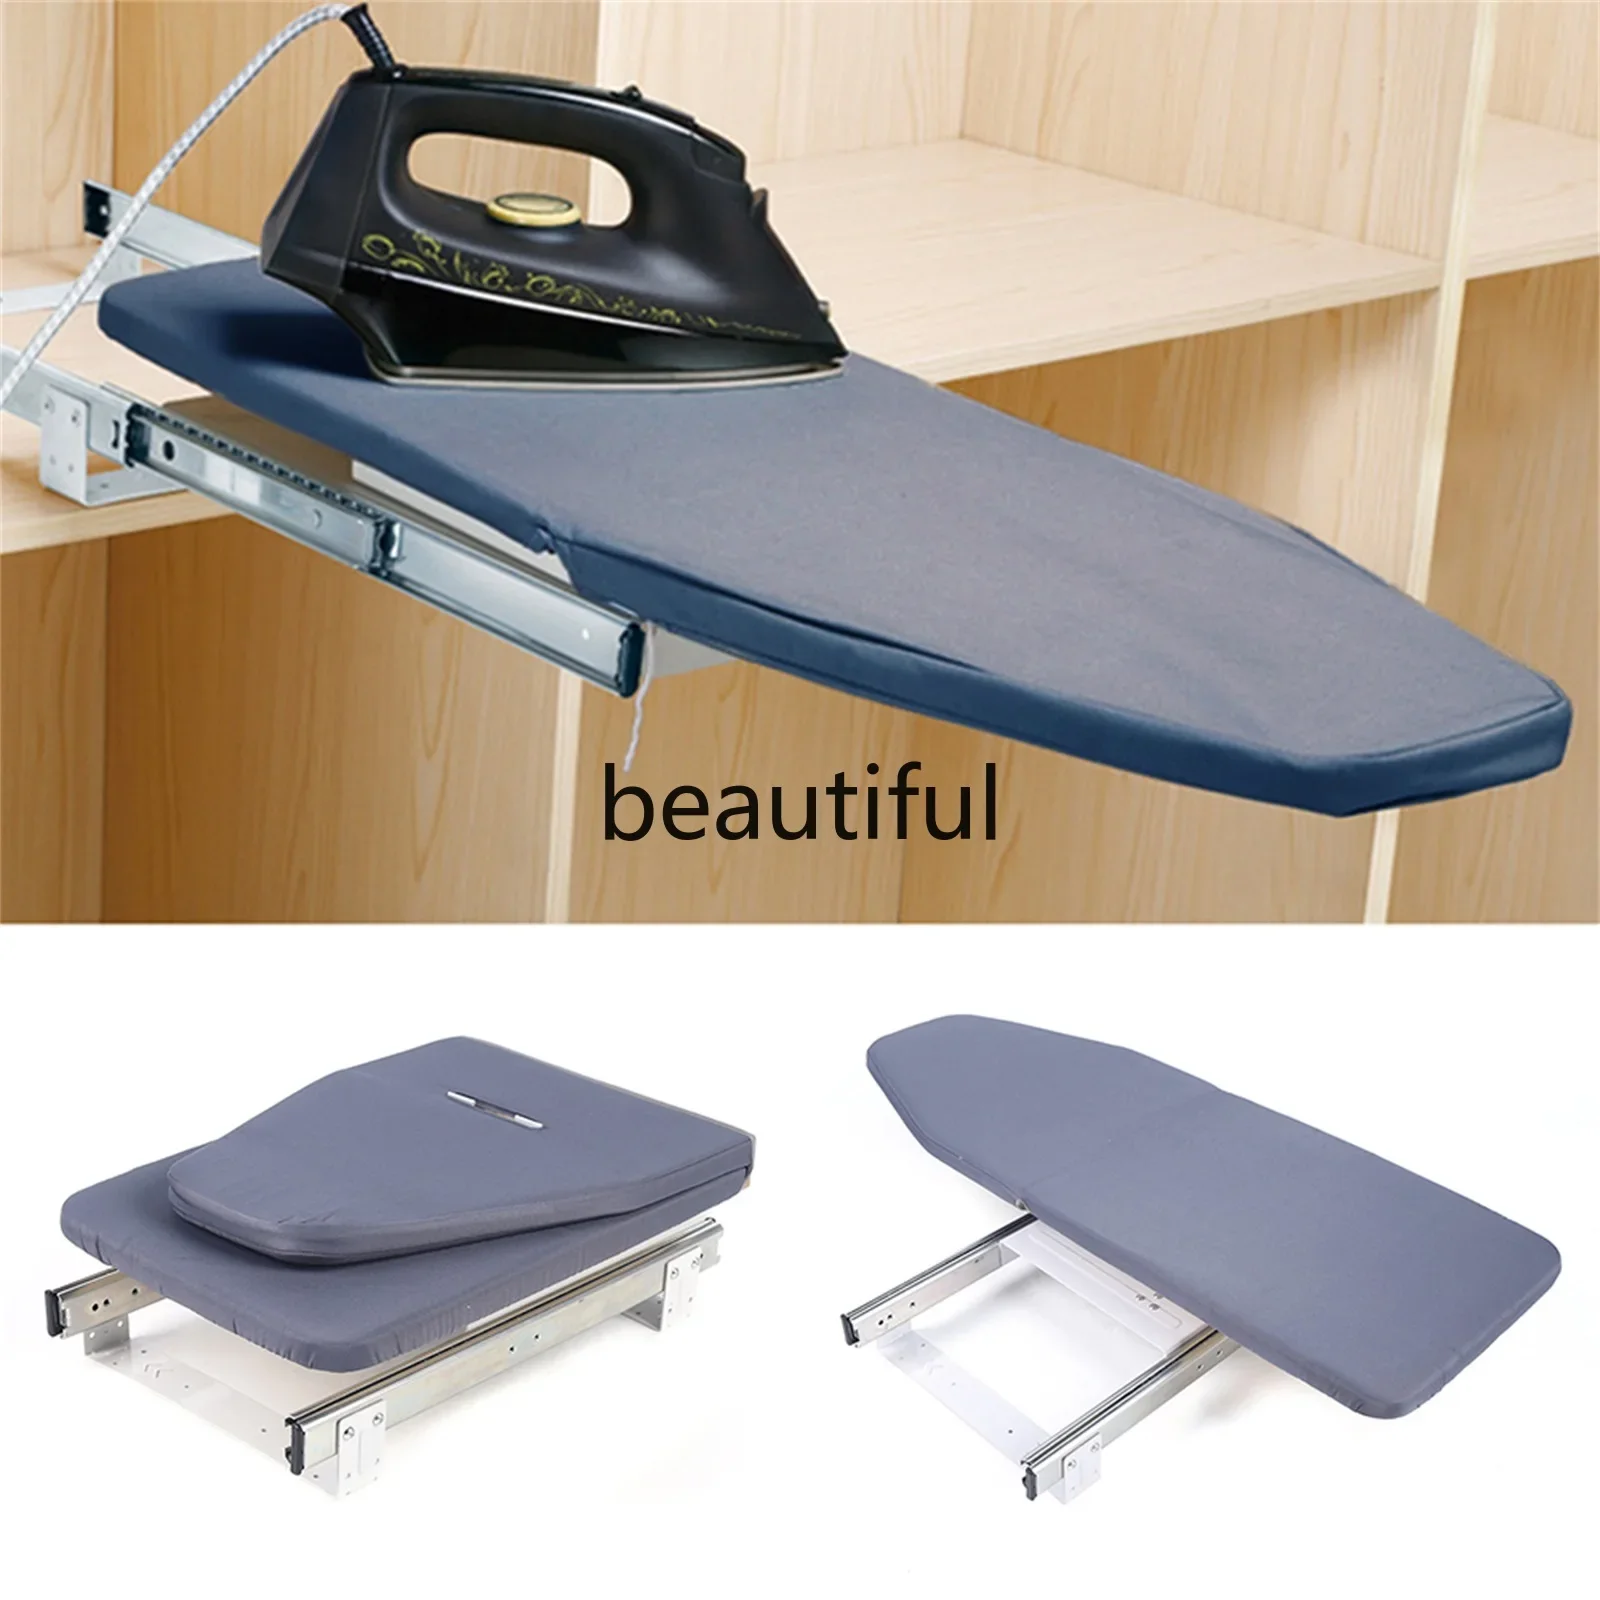 

Ironing Board Wall Mount Hook Hanger Universal Holder Home Laundry Room Ironing Board Shelf Storage Rack Laundry Accessories